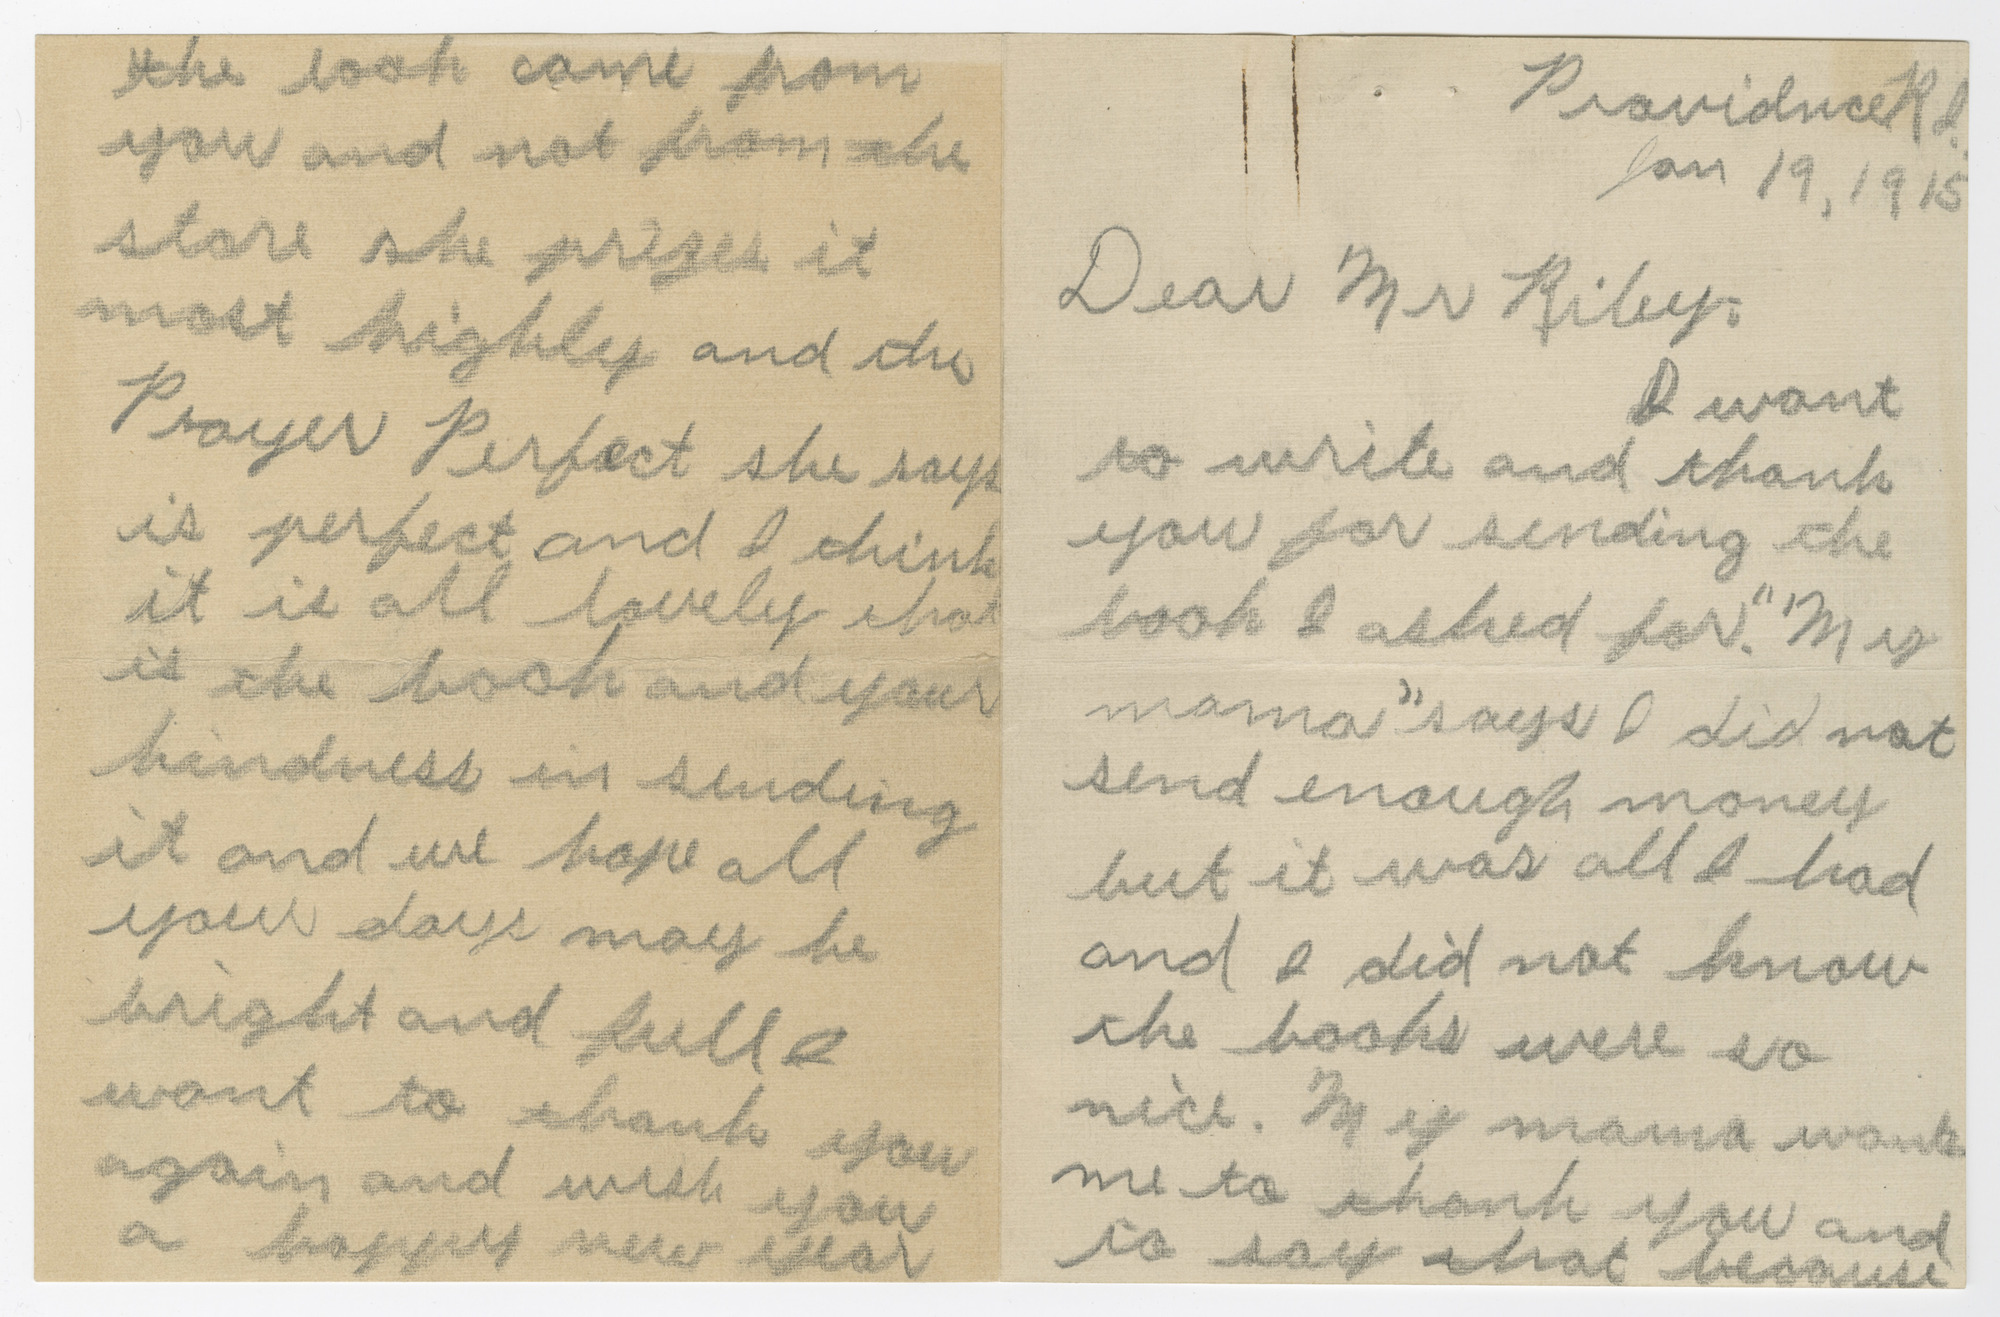 Correspondence from Ellsworth Wallace to James Whitcomb Riley, January 19, 1915.